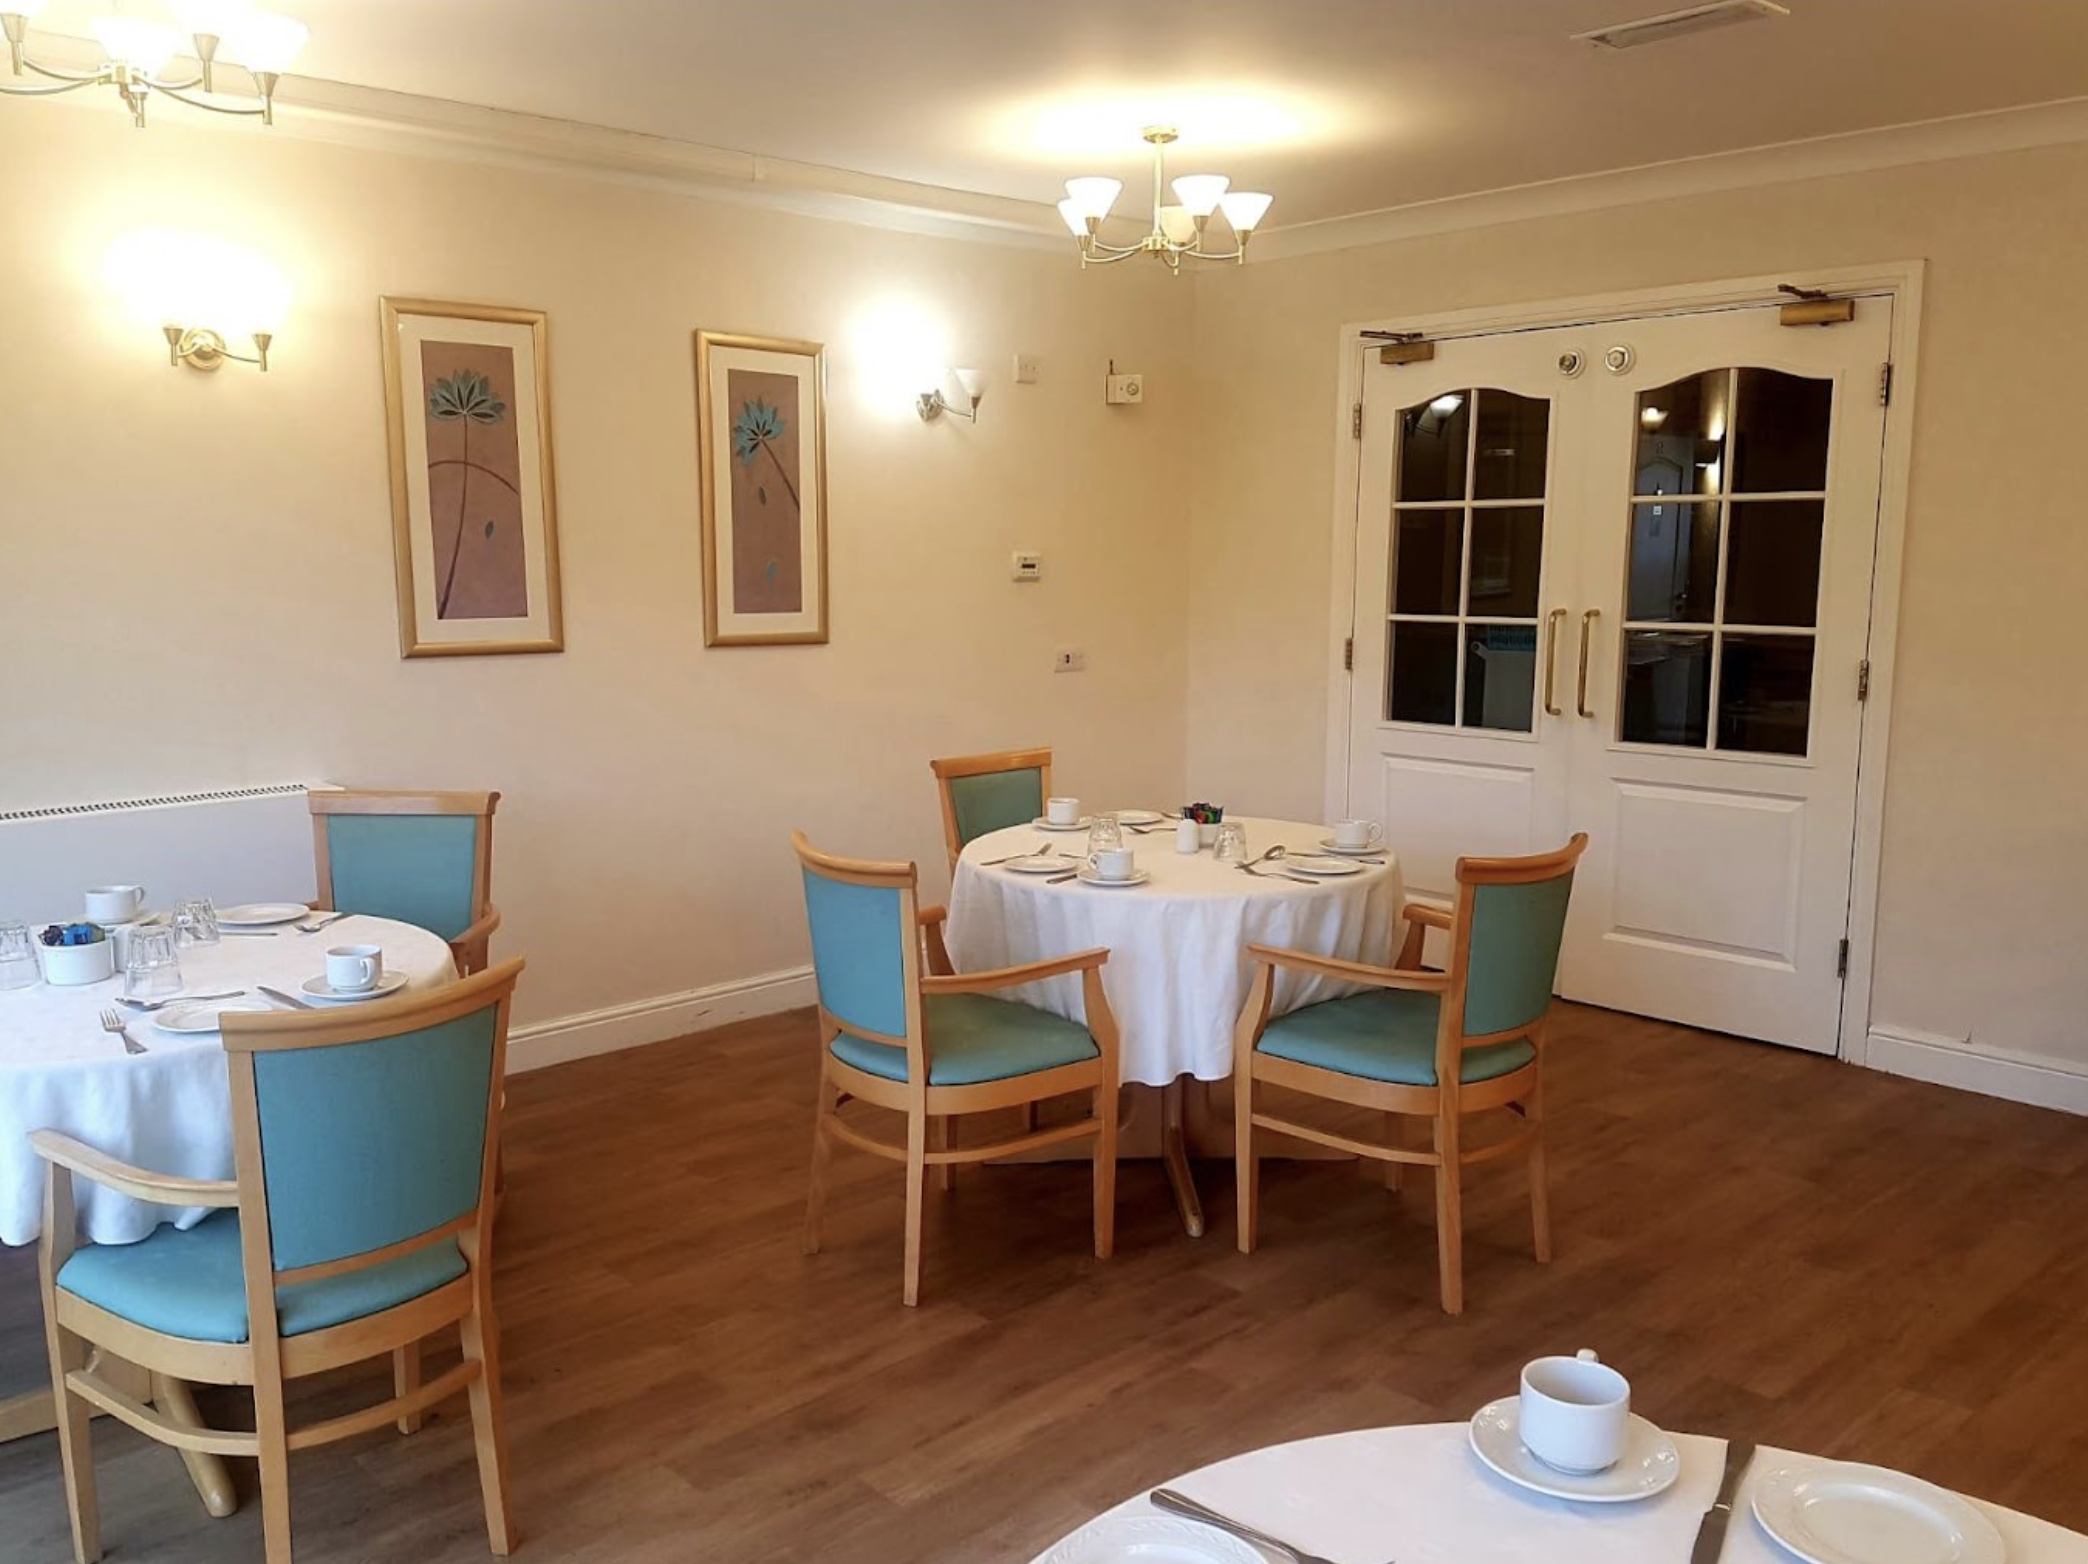 Dining room of Berkeley House care home in Hull, East Yorkshire